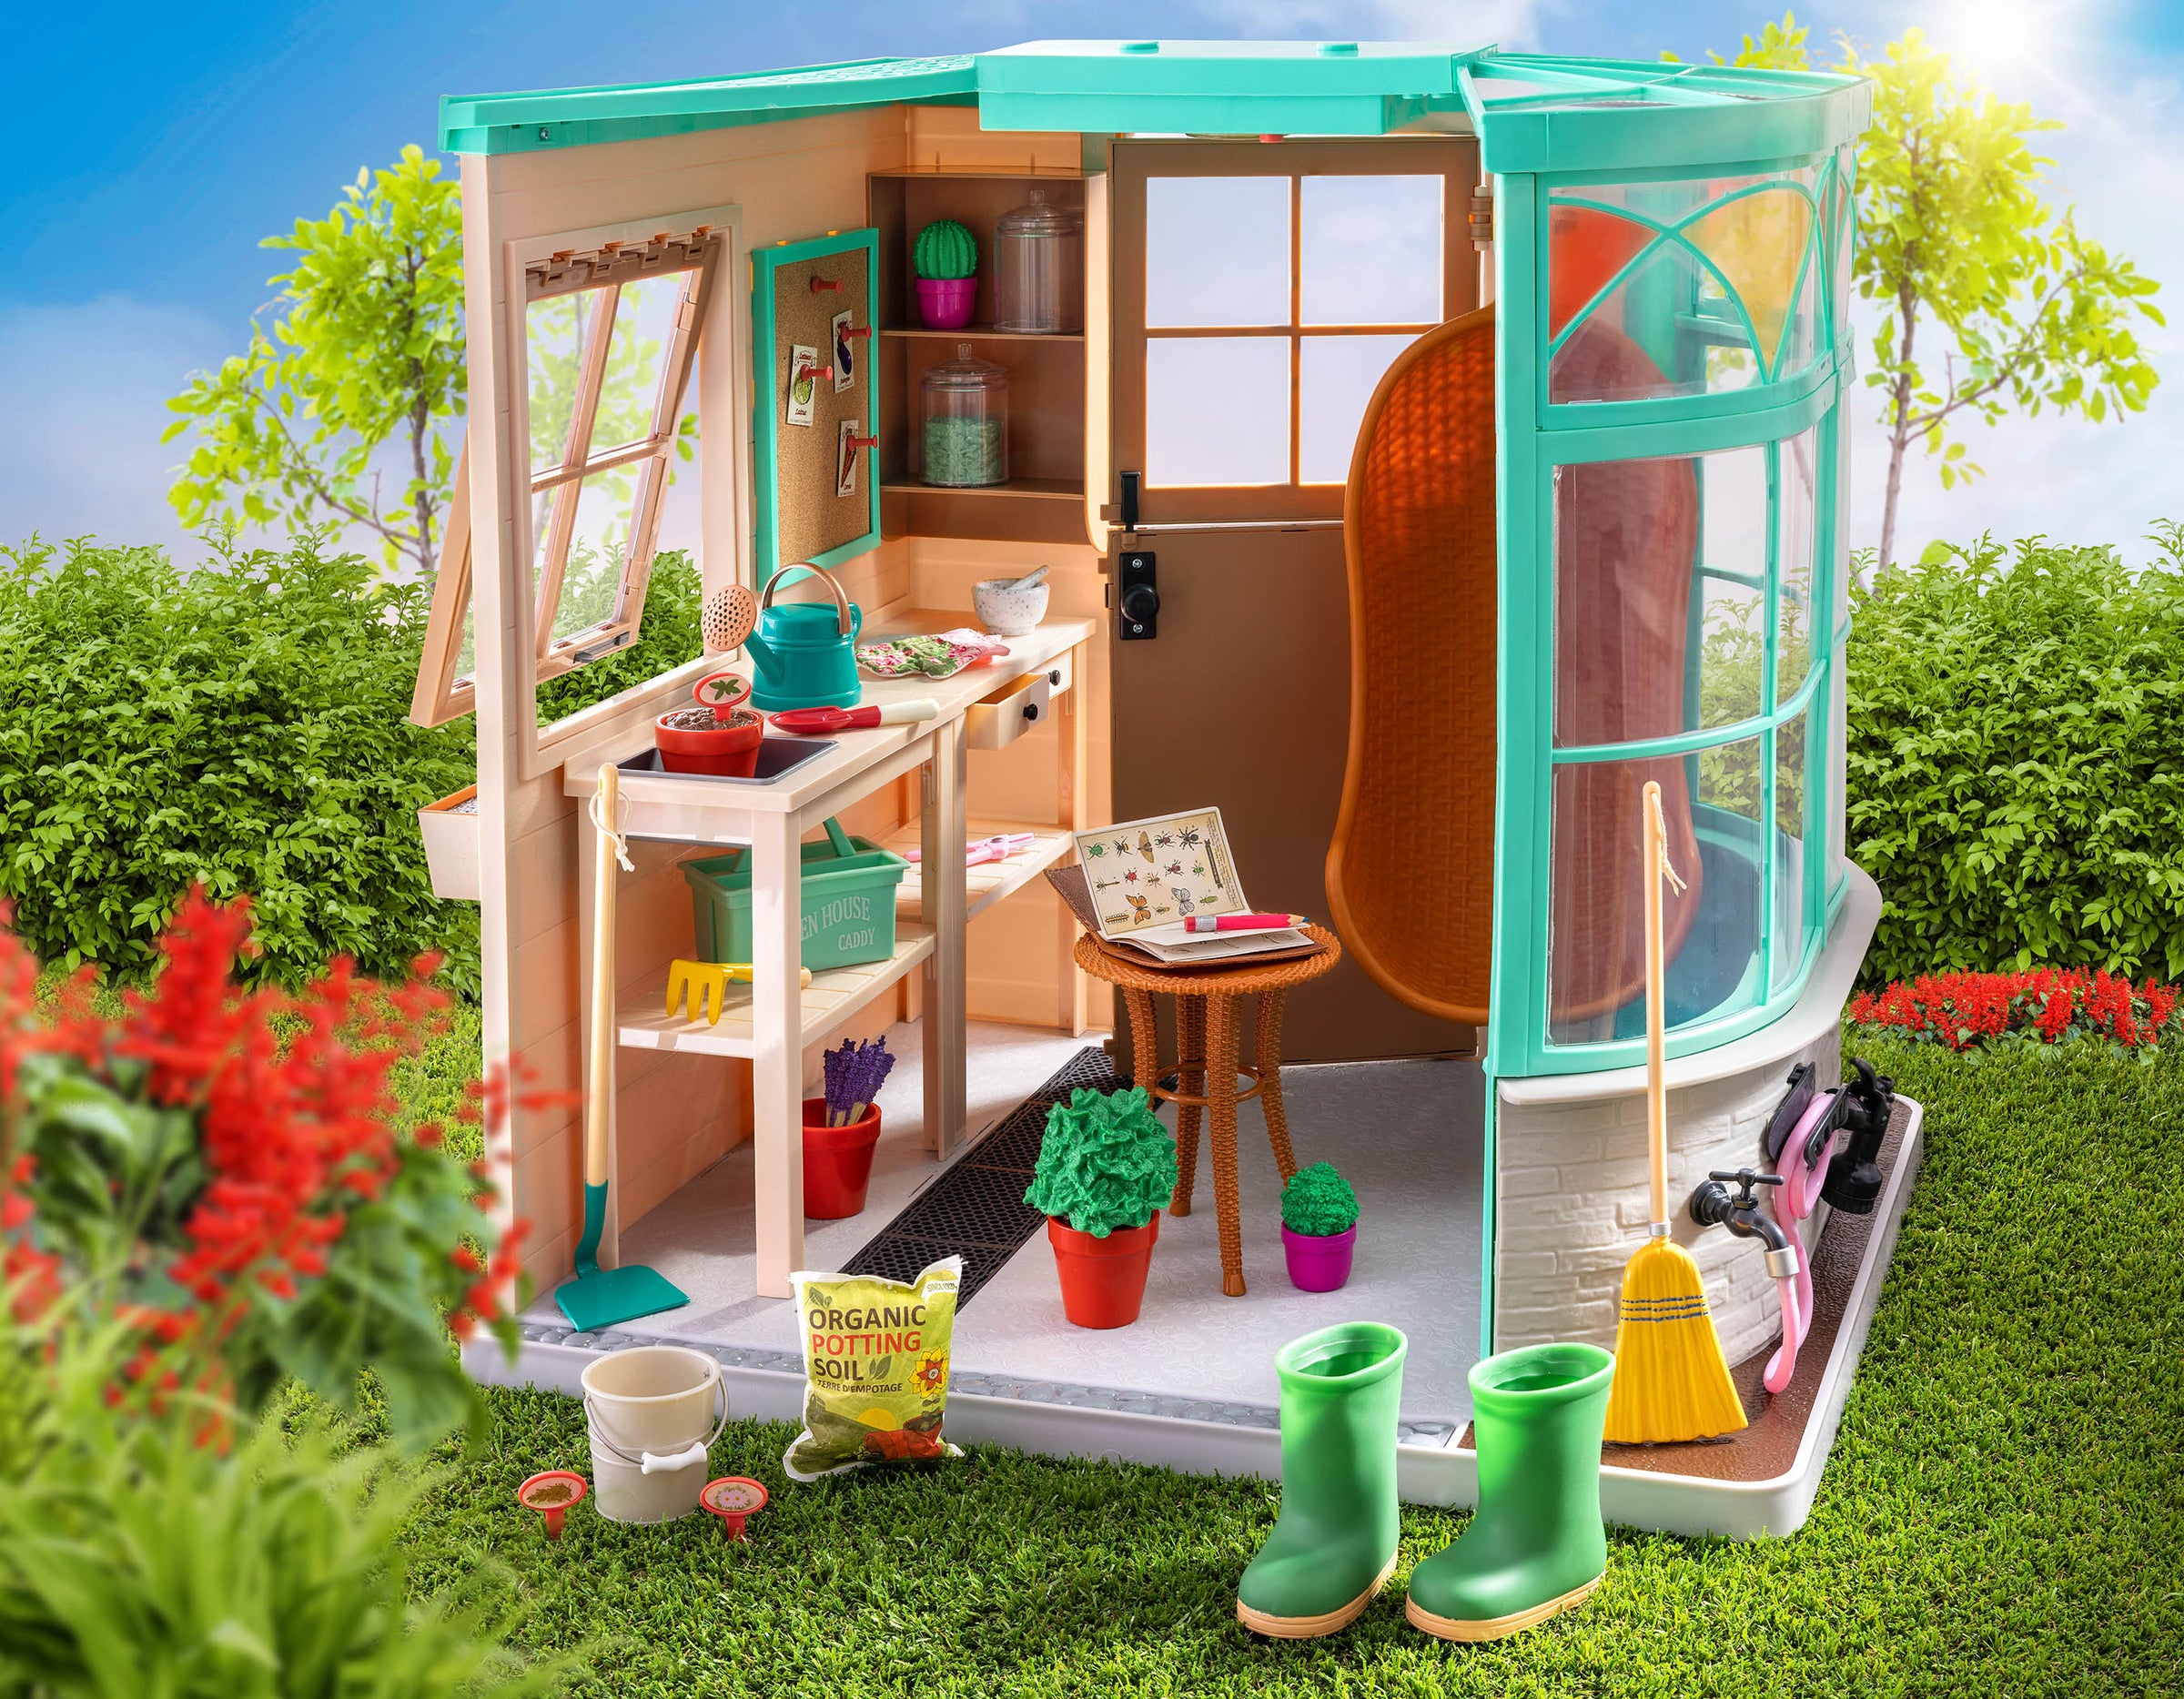 Our Generation Greenhouse is being shown, which has lots of accessories scattered around the playset. 